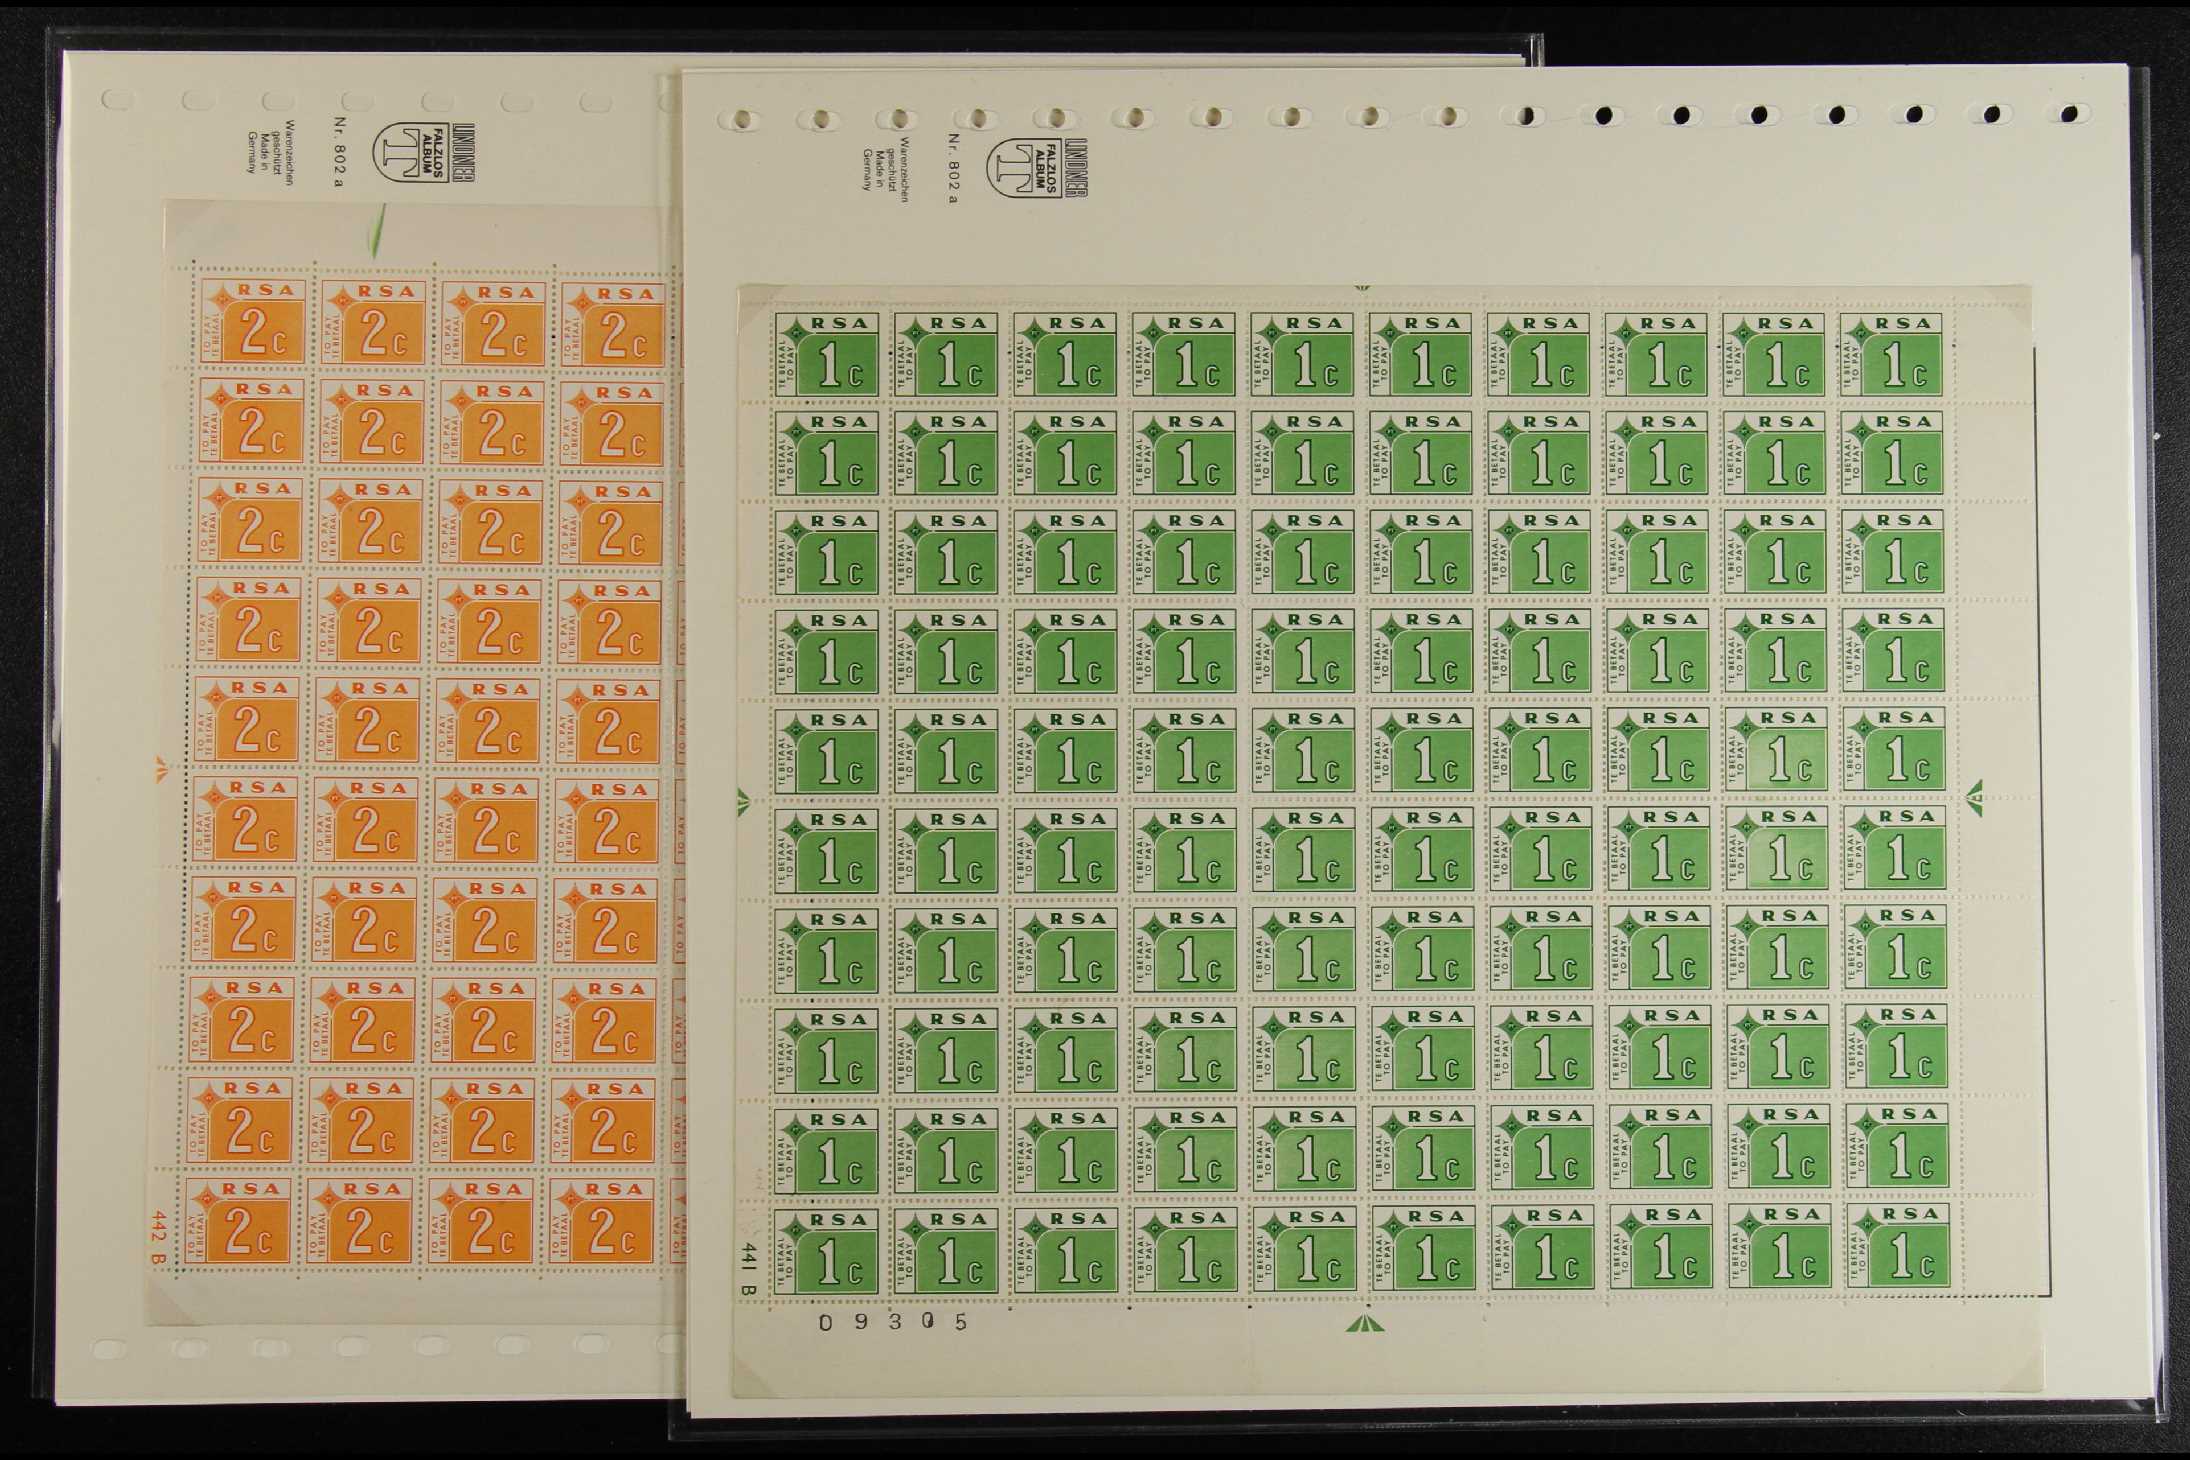 SOUTH AFRICA POSTAGE DUES 1972 complete set, SG D75/80, complete sheet 100 never hinged mint, - Image 7 of 7